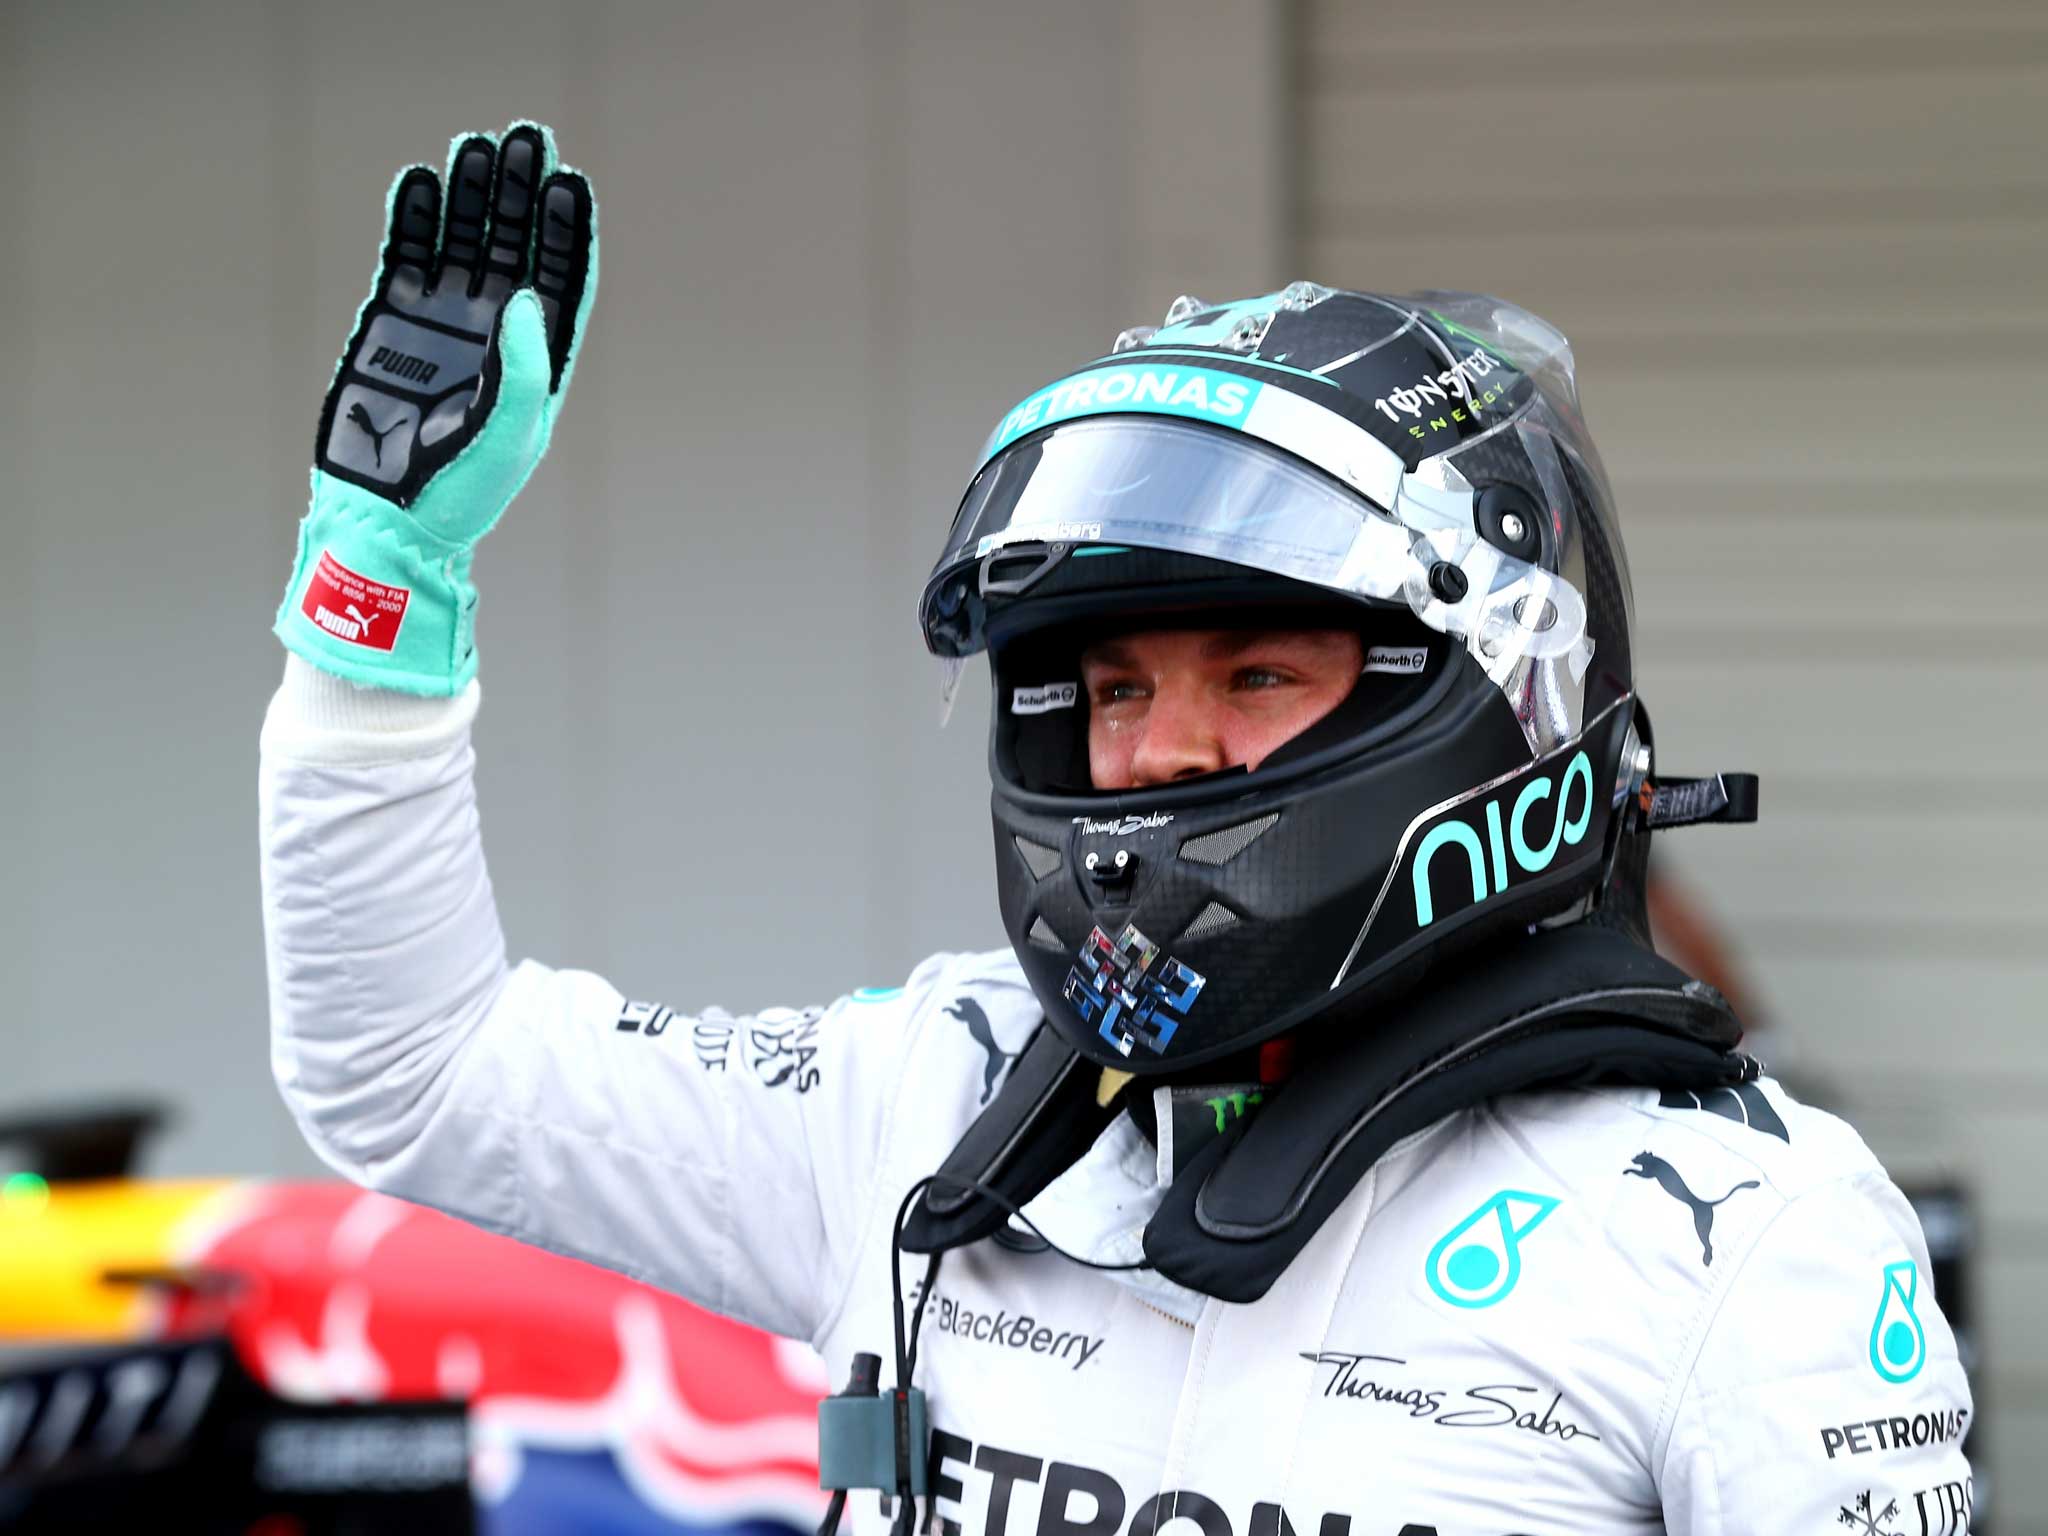 Nico Rosberg sealed what could prove to be a crucial pole position ahead of Sunday's Japanese Grand Prix